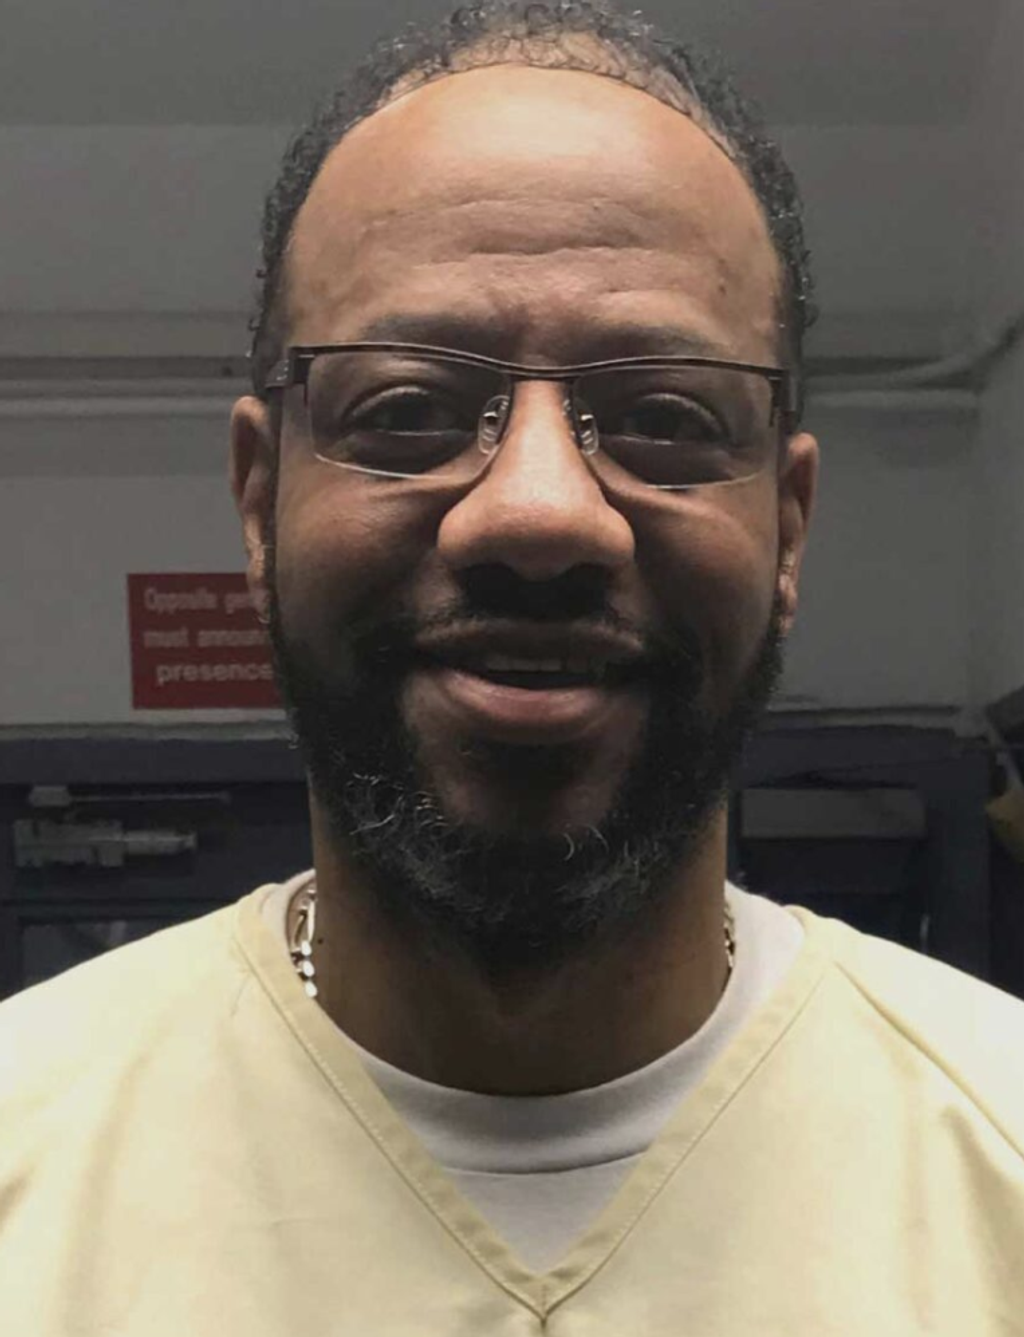 Black Legislators, Legal Associations, Faith Leaders, and Community Groups Call for DNA Testing/Intellectual Disability Hearing that Could Take Pervis Payne Off Tennessee’s Death Row